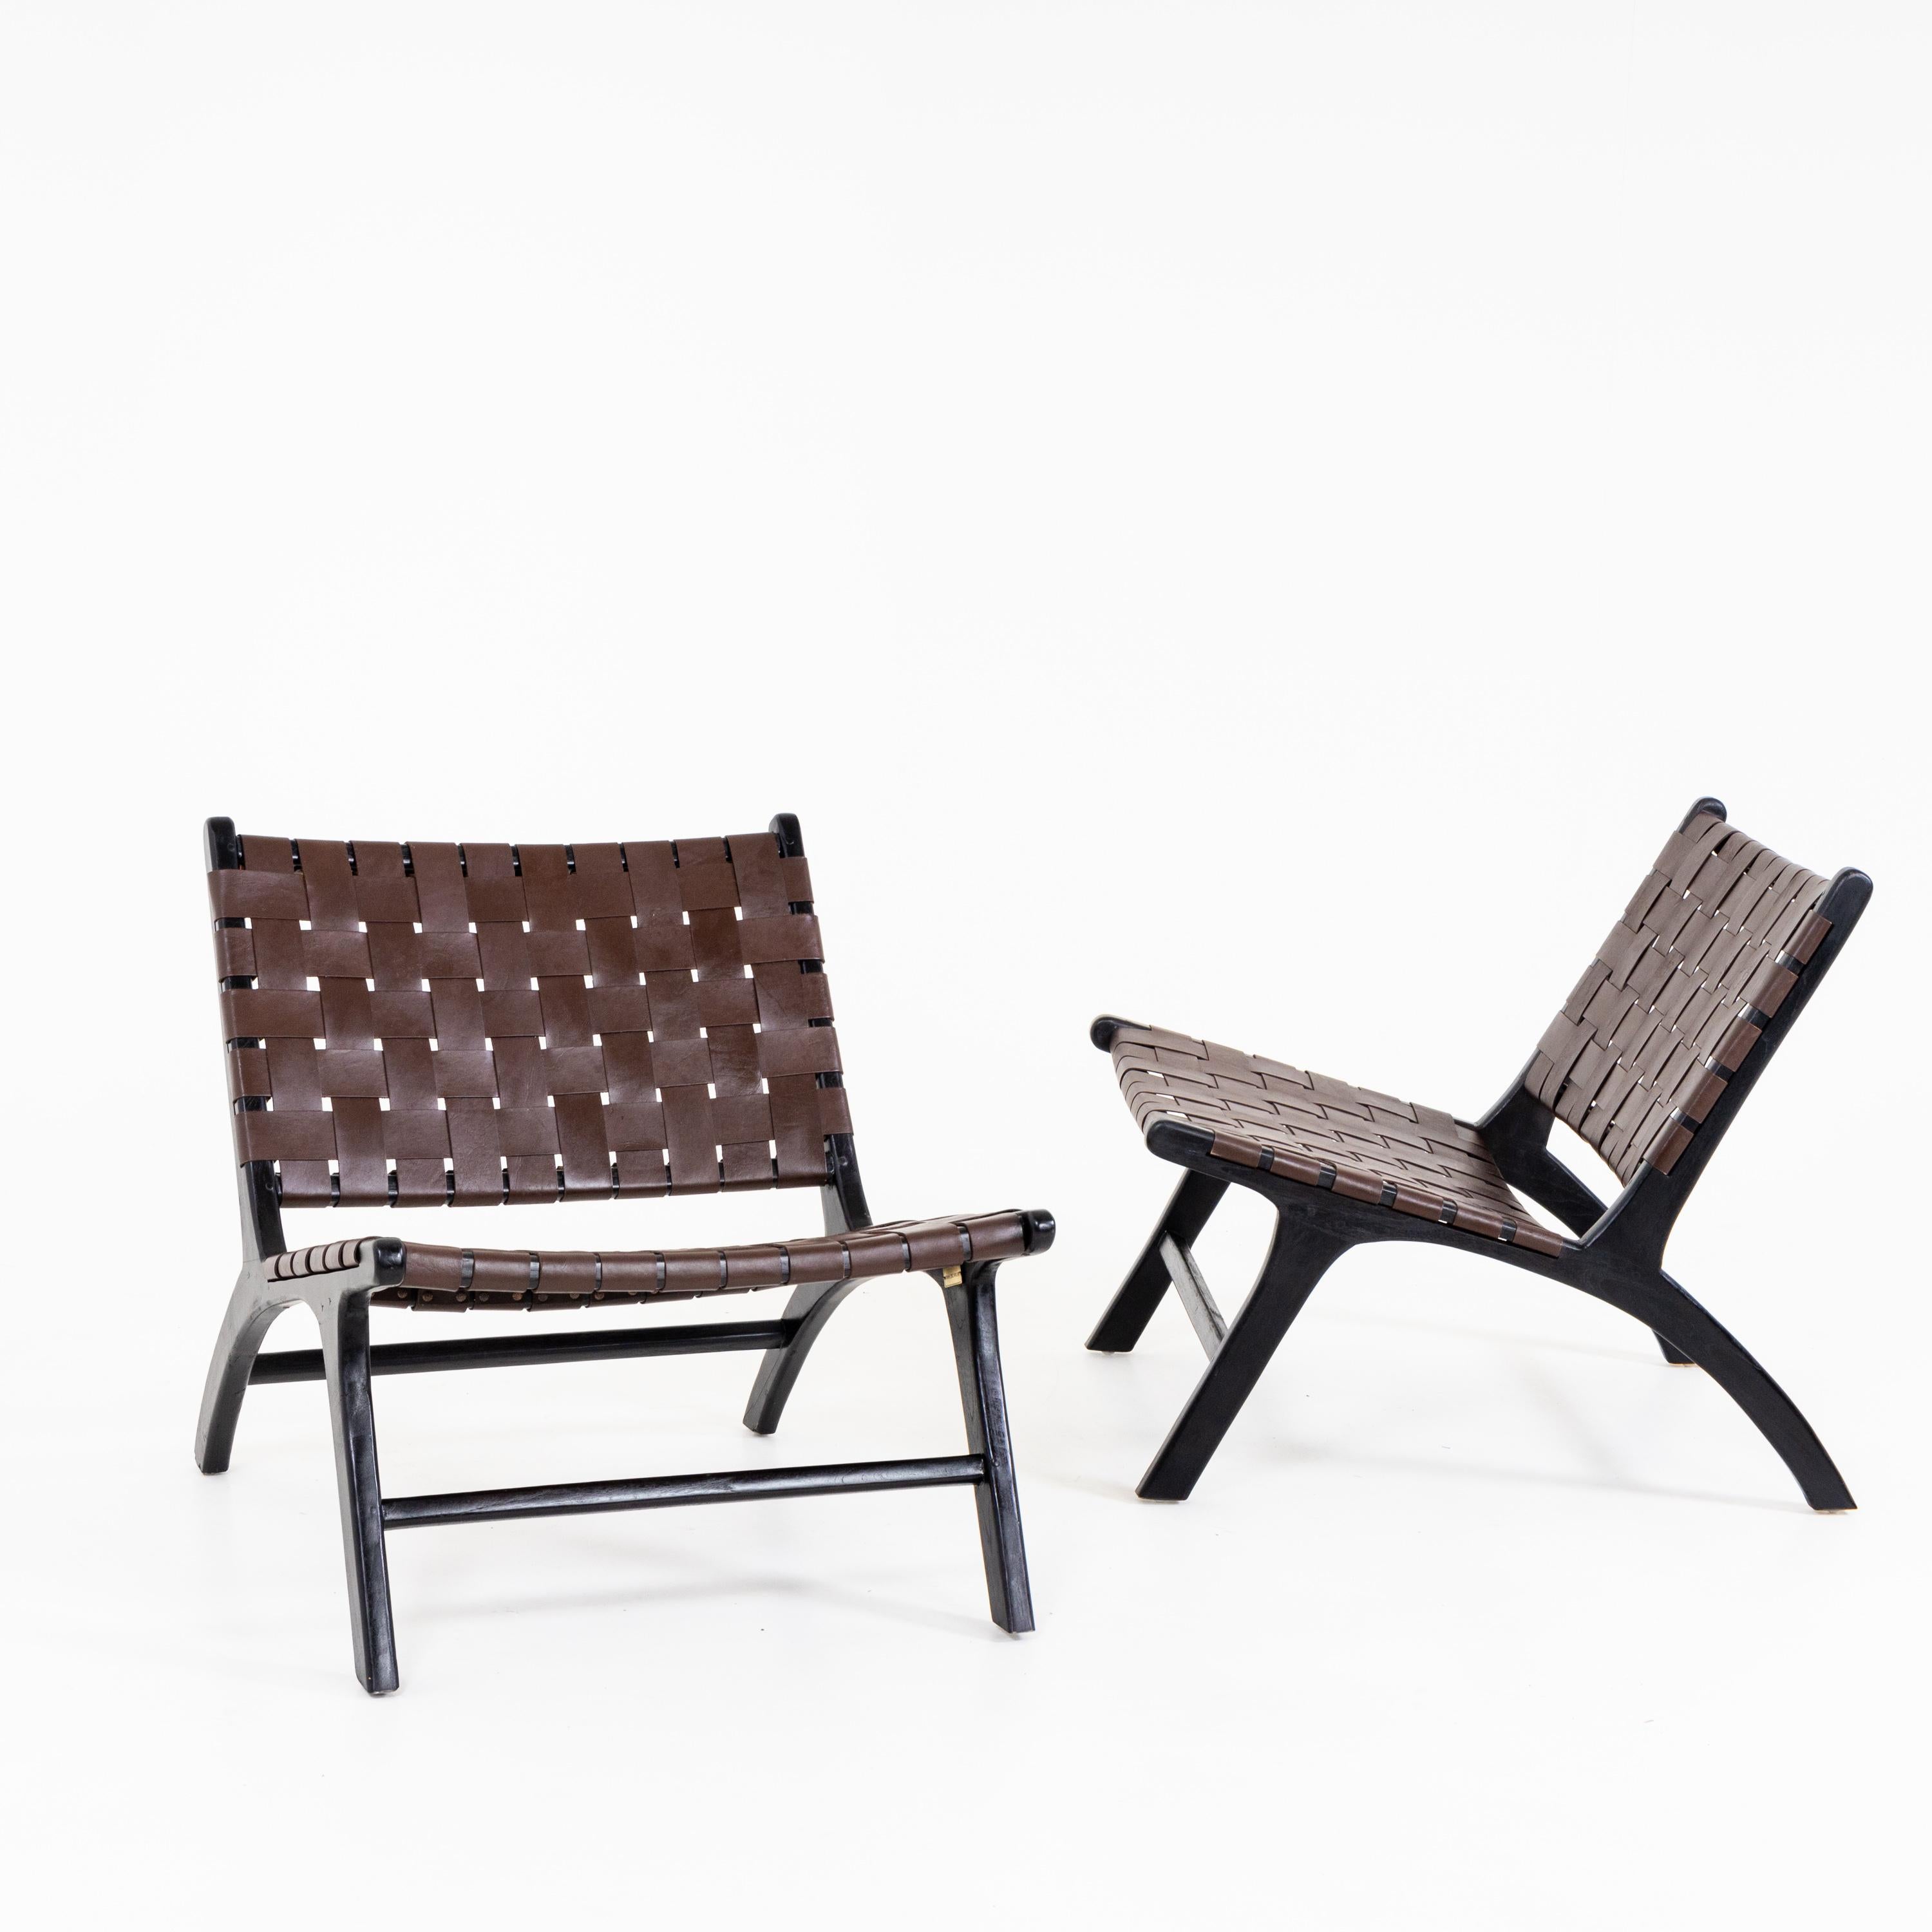 Pair lounge chairs by Olivier de Schrijver (Belgium *1958) with woven leather cover on dark stained wooden frame.